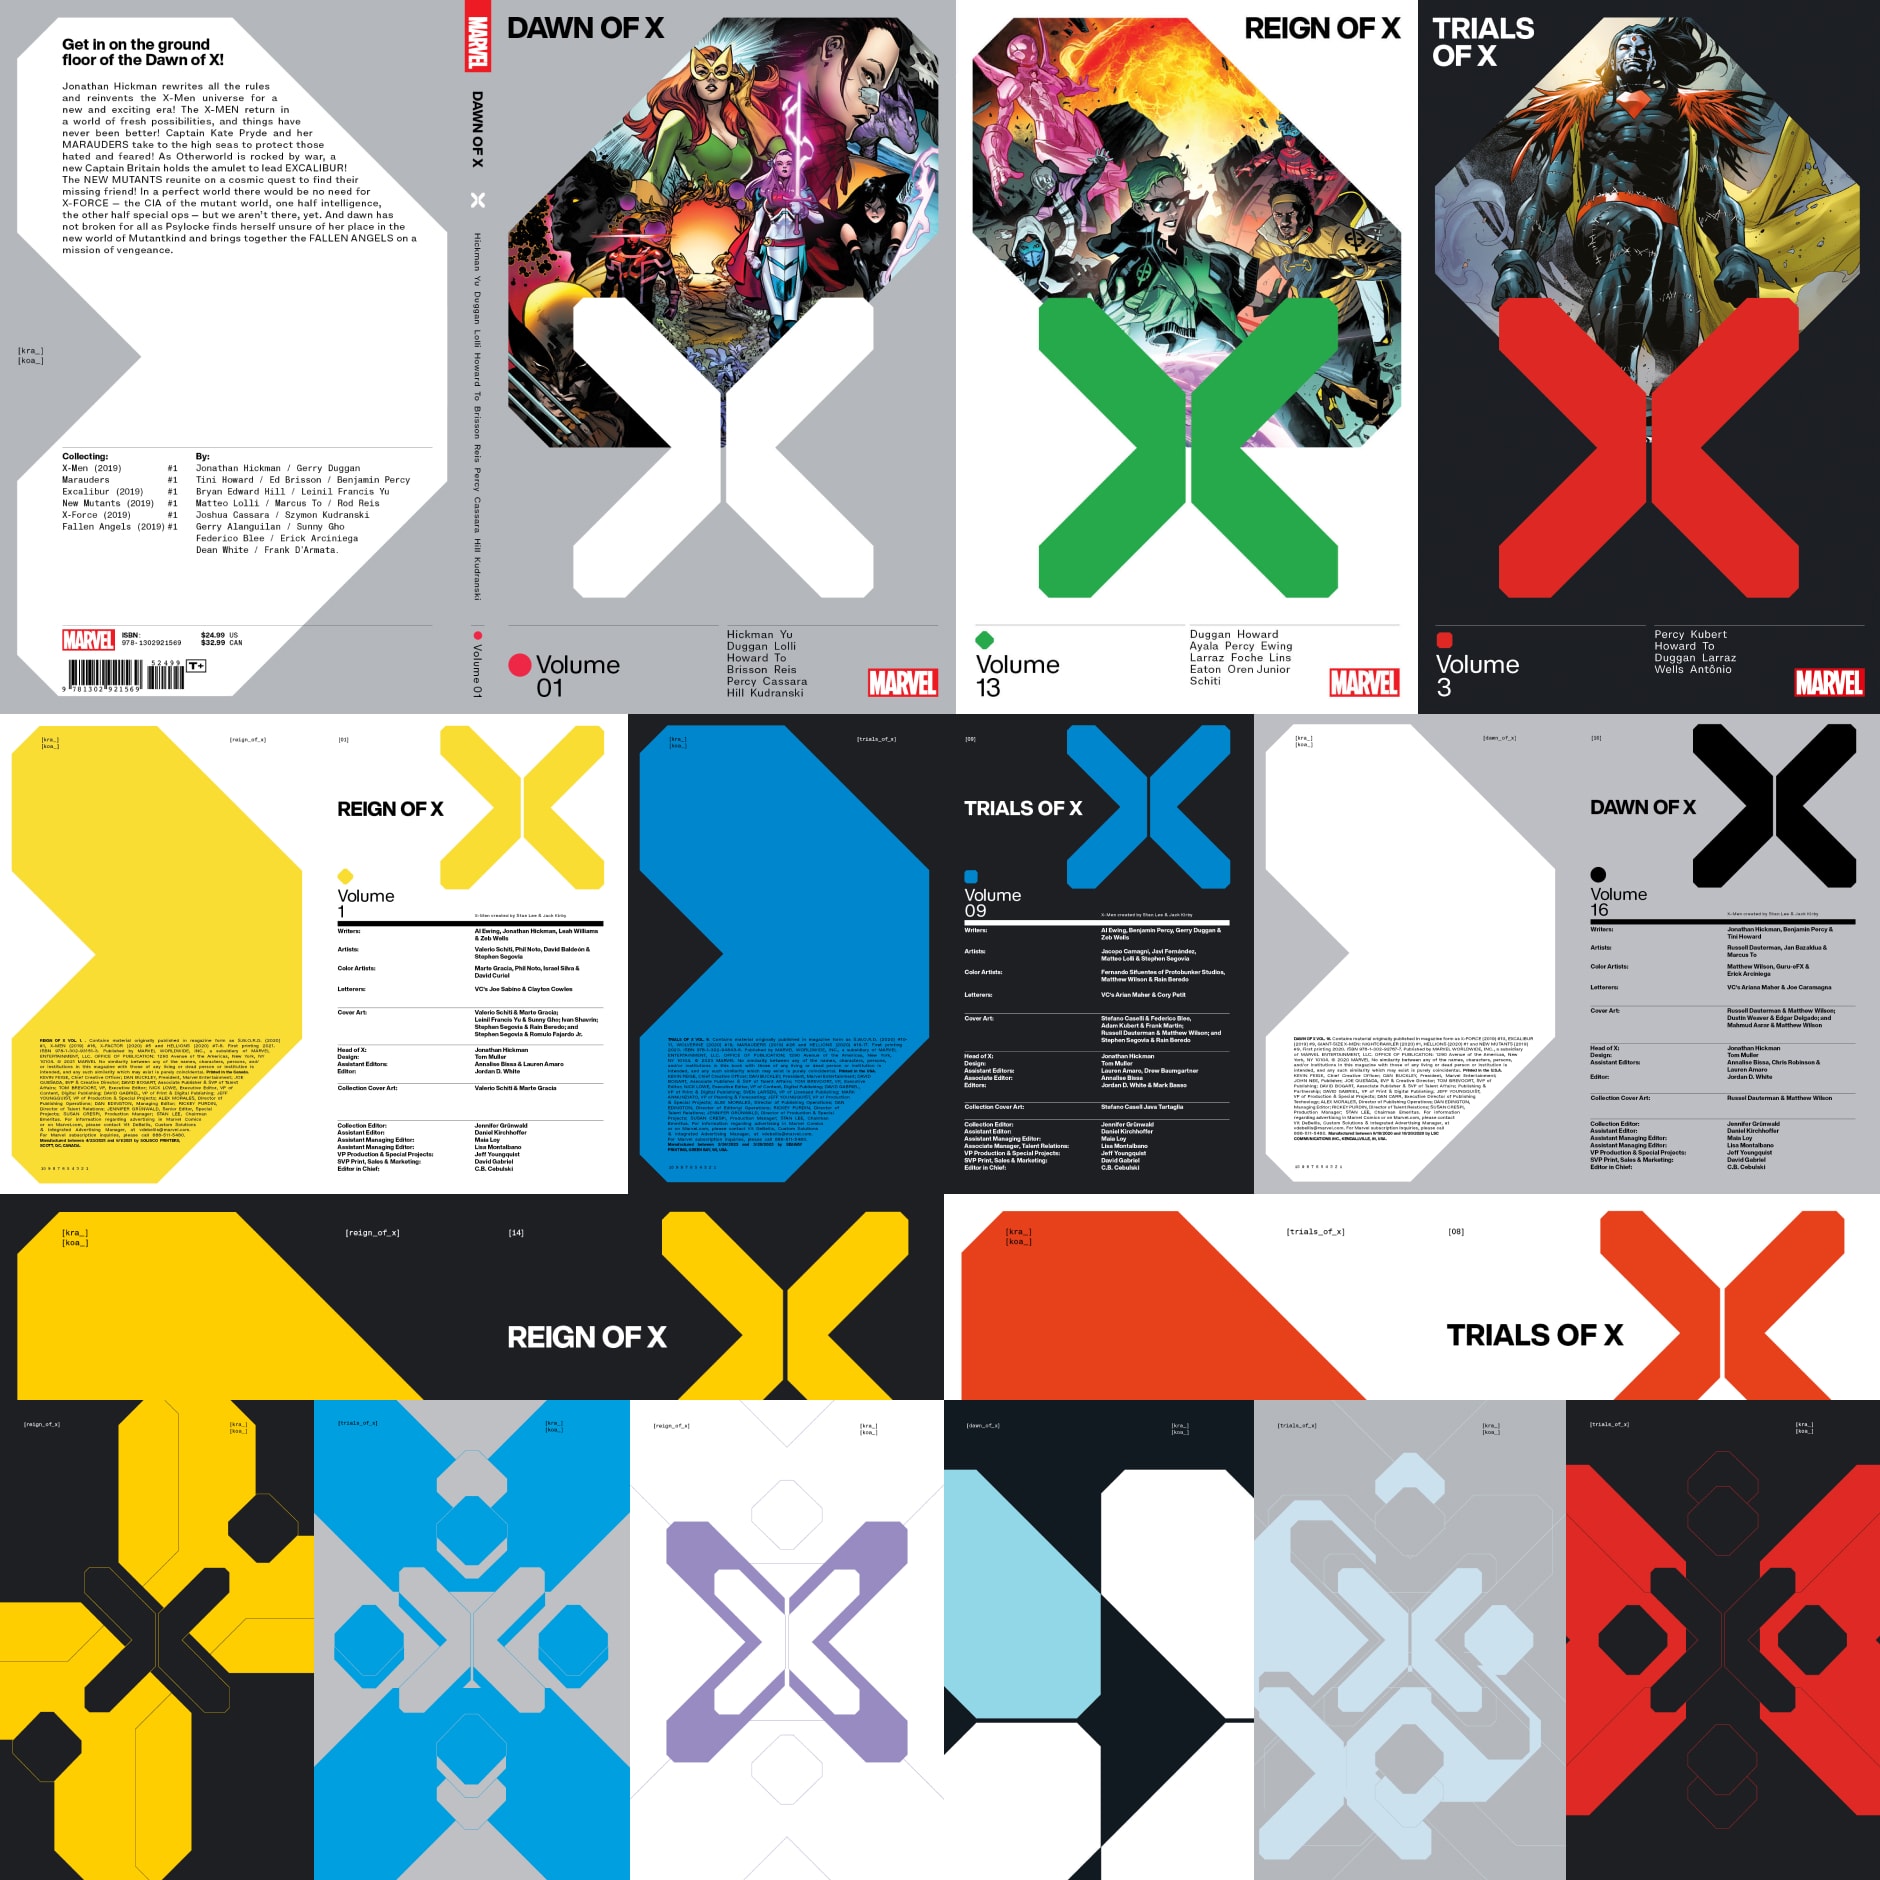 Dawn of X X-Men collections